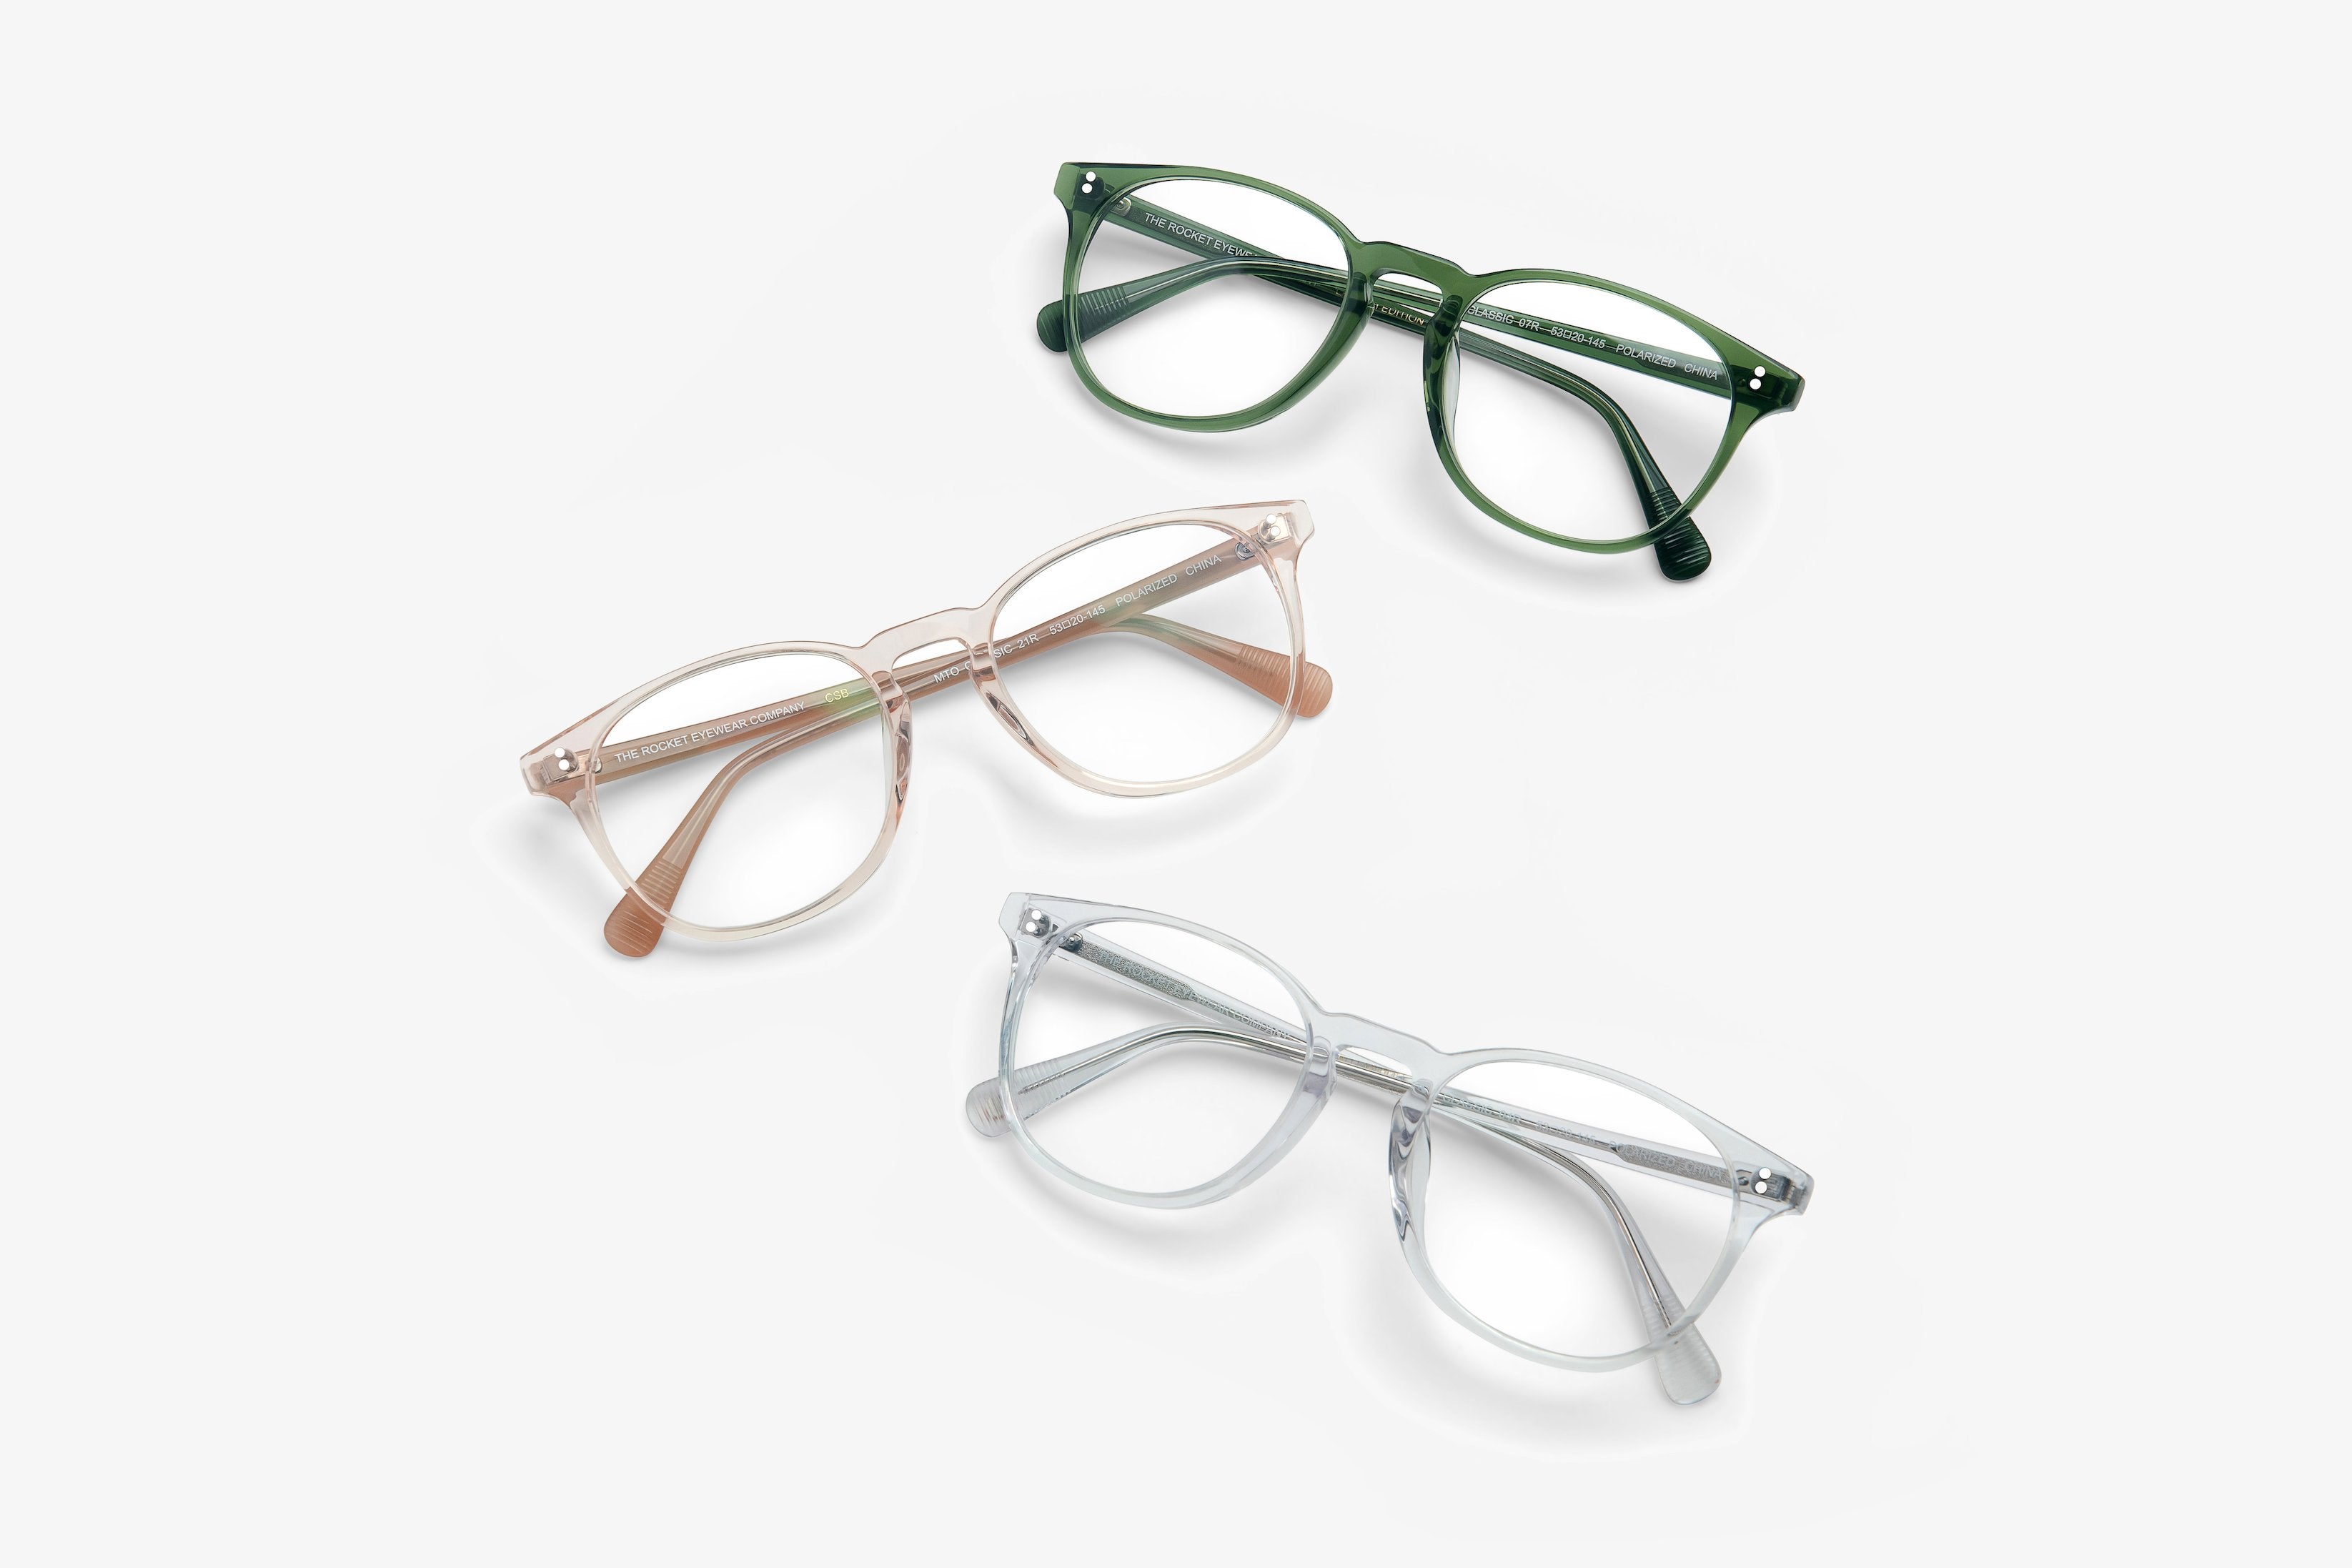 Clear glasses and sunglasses frames – The Rocket Eyewear Company